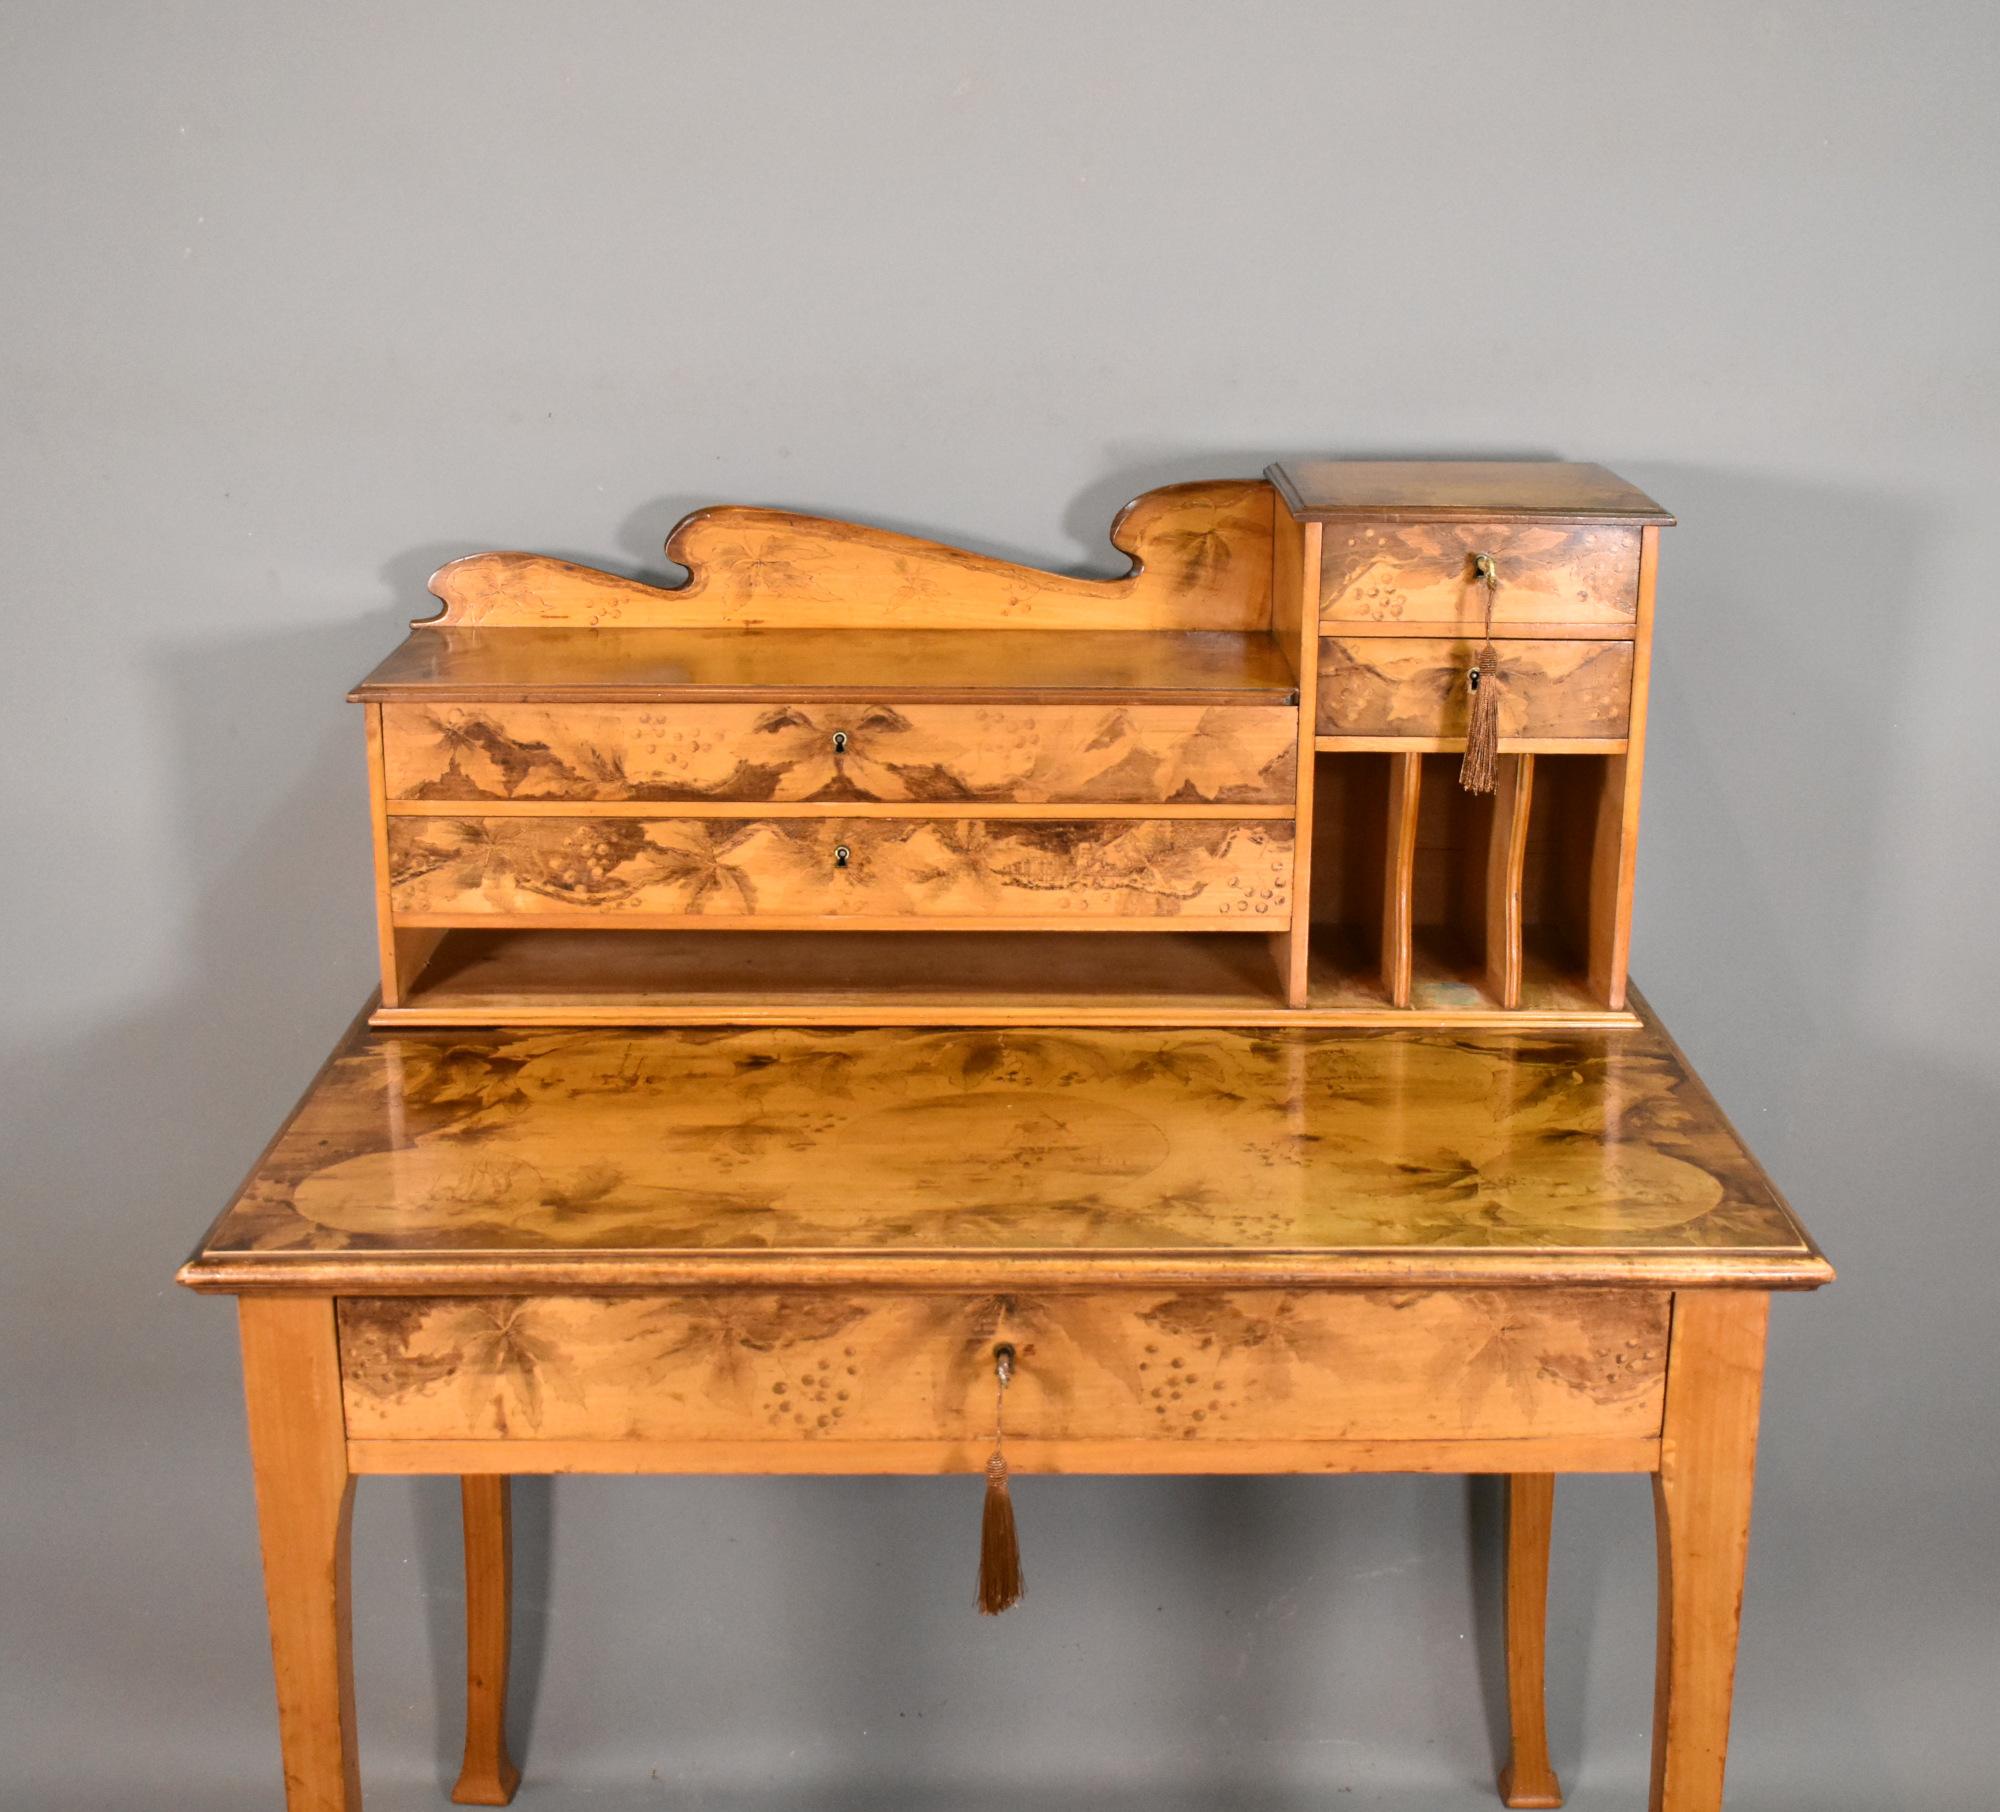 19th Century Art Nouveau Tiered Pyrography Etched Desk For Sale